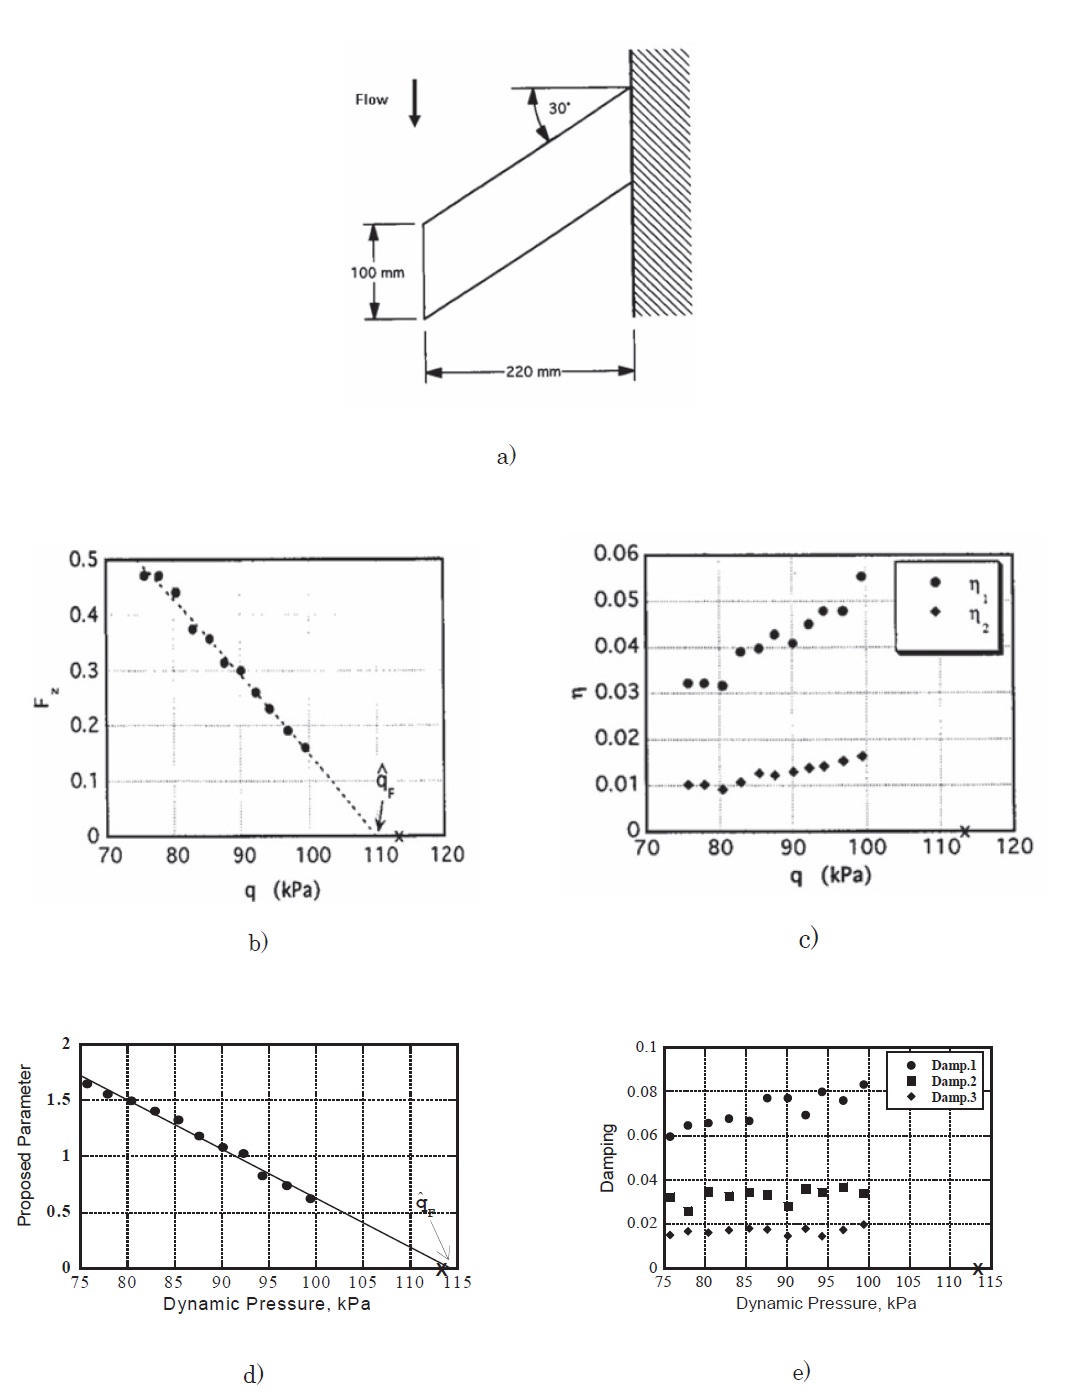 Flutter boundary prediction of a wing tested in a supersonic wind-tunnel: (a) wing model, (b) estimated FMDS-2 vs. q, (c) estimated two damping coefficients vs. q. From Torii and Matsuzaki (2001); (d) estimated FMDS-3 vs. q, (e) estimated three damping coefficients vs. q. From Torii and Matsuzaki (2011); (a cross on the coordinate: measured flutter boundary, qF= 113.5 kPa). Reprinted with permission of AIAA.